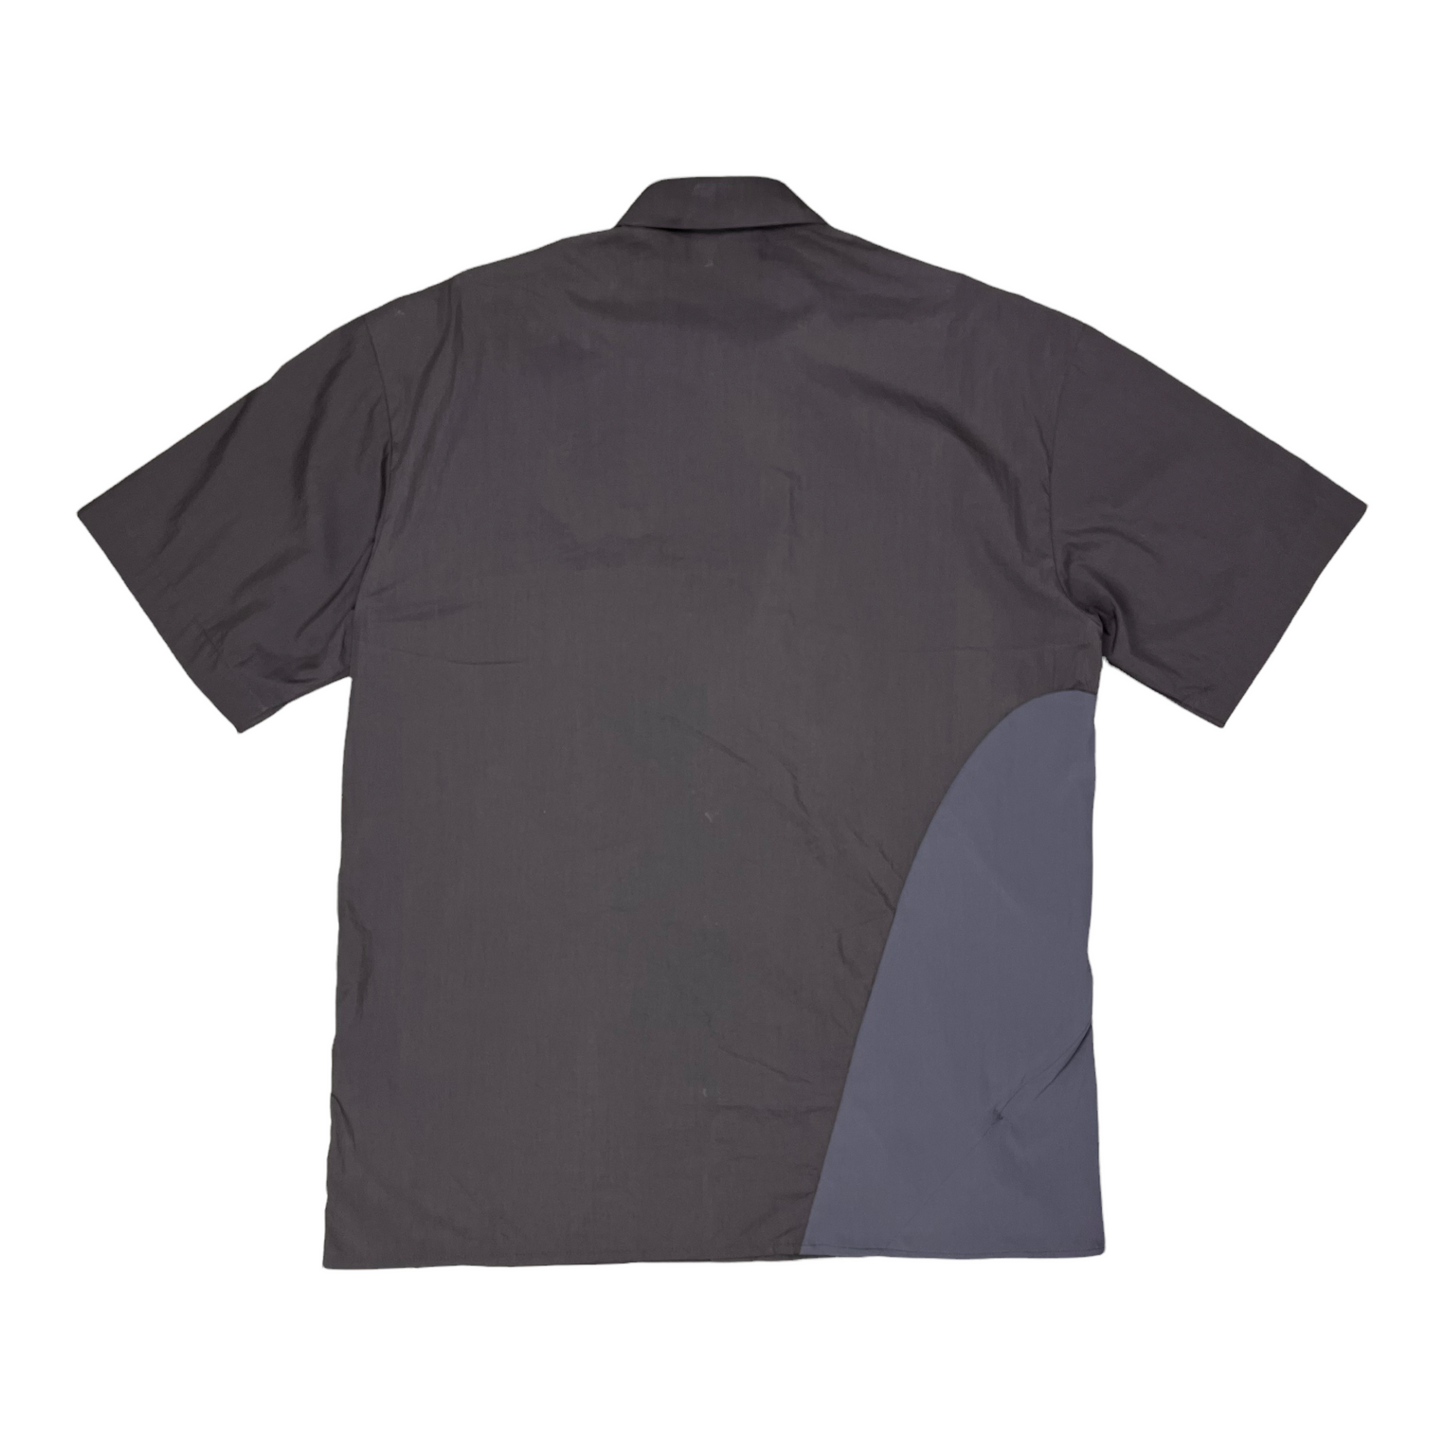 Post Archive Faction 4.0 Center Shirt Brown - SS21